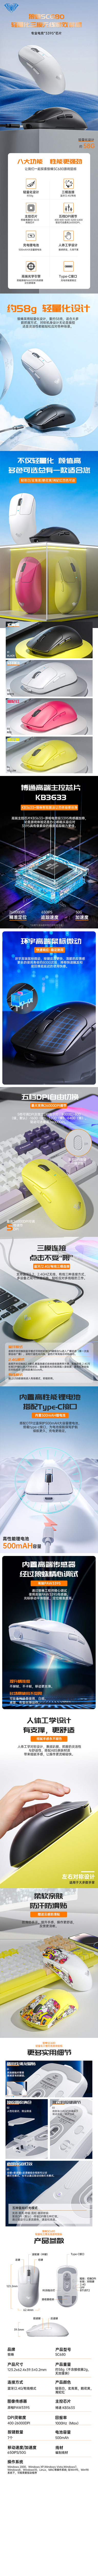 AULA SC680 Three-mode Gaming Mouse(图1)